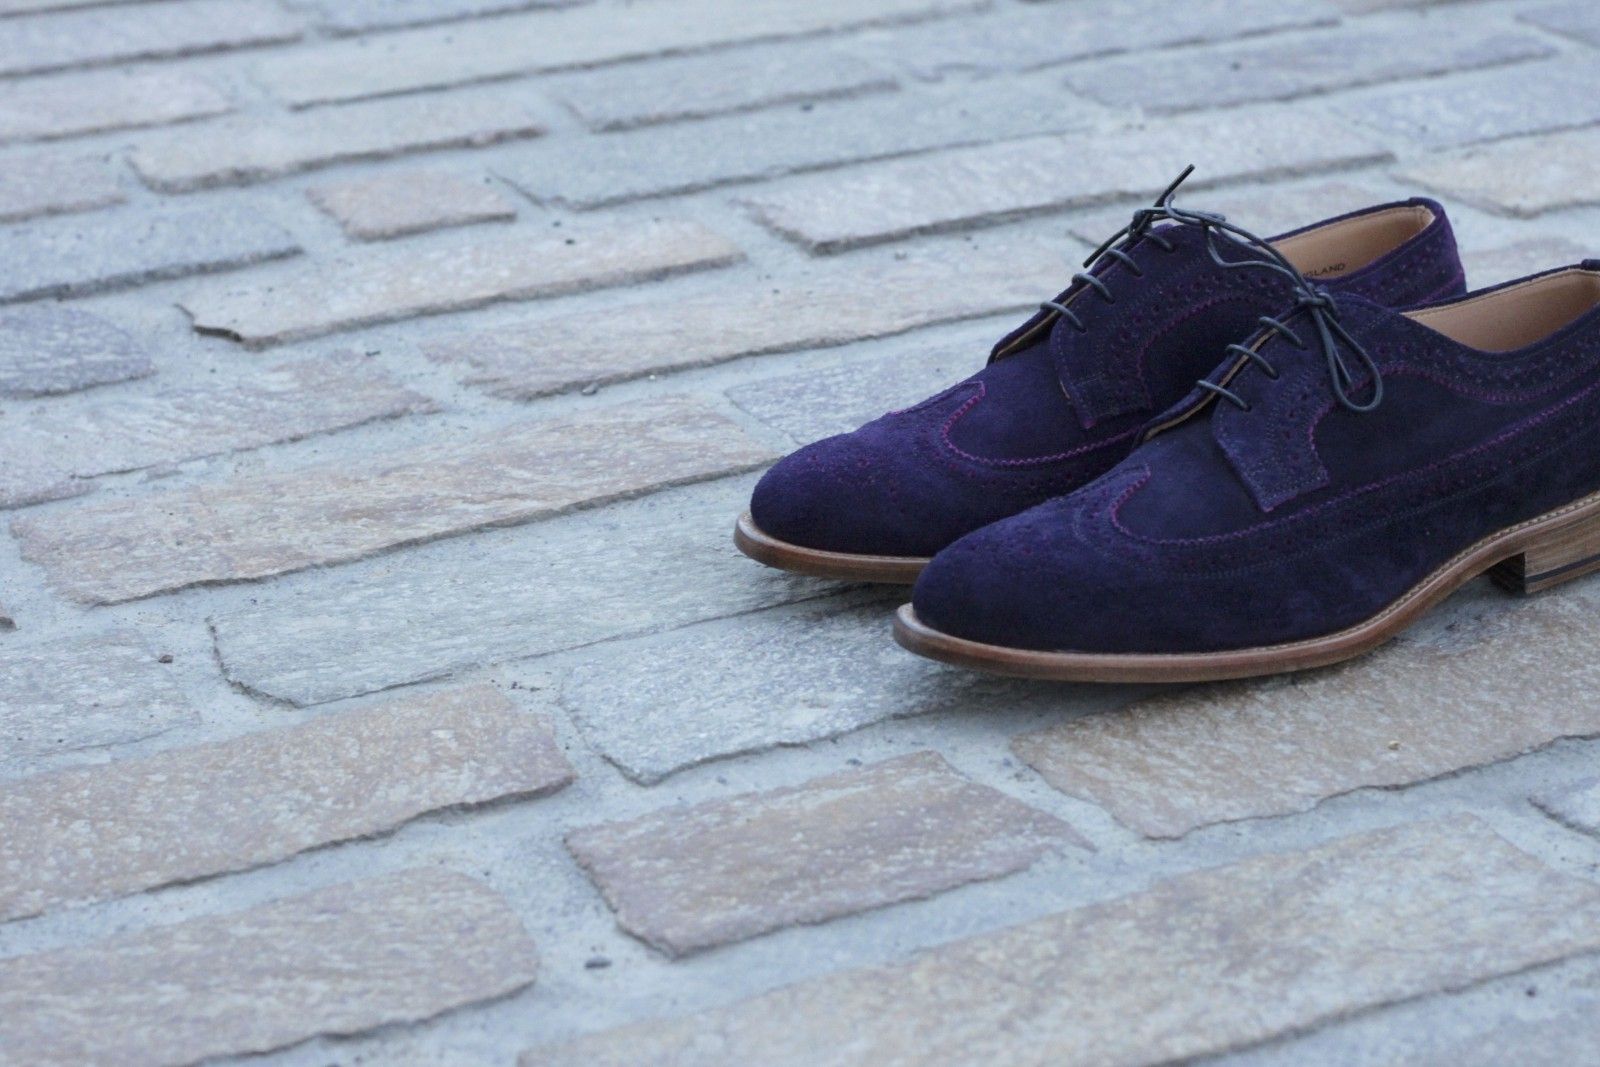 Long wing brogue, Navy & Purple stitch in Suede